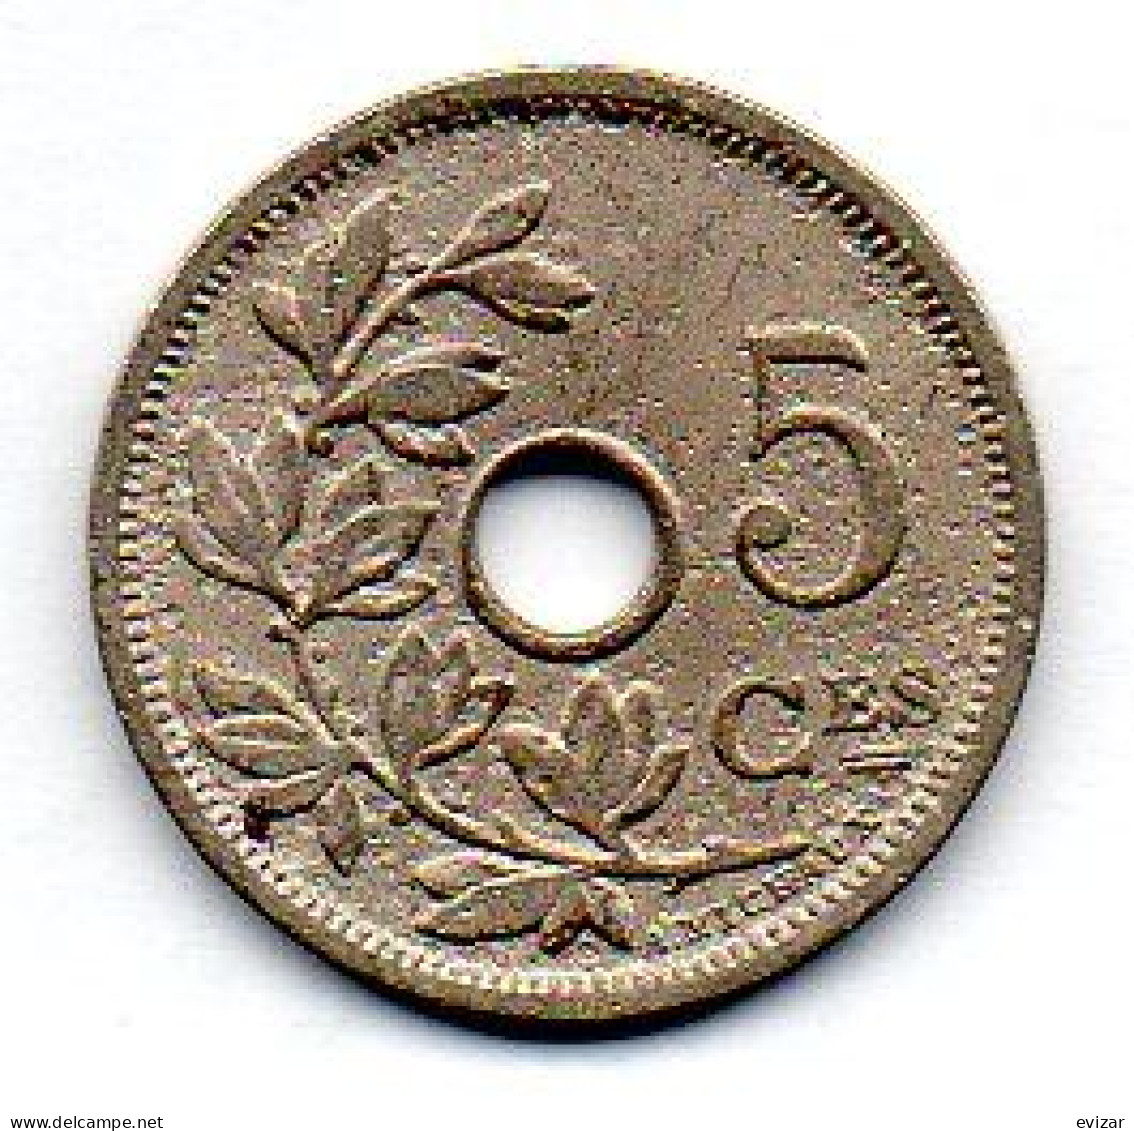 BELGIUM, 5 Centimes, Copper-Nickel, Year 1902, KM # 46, French Legend - 5 Cents